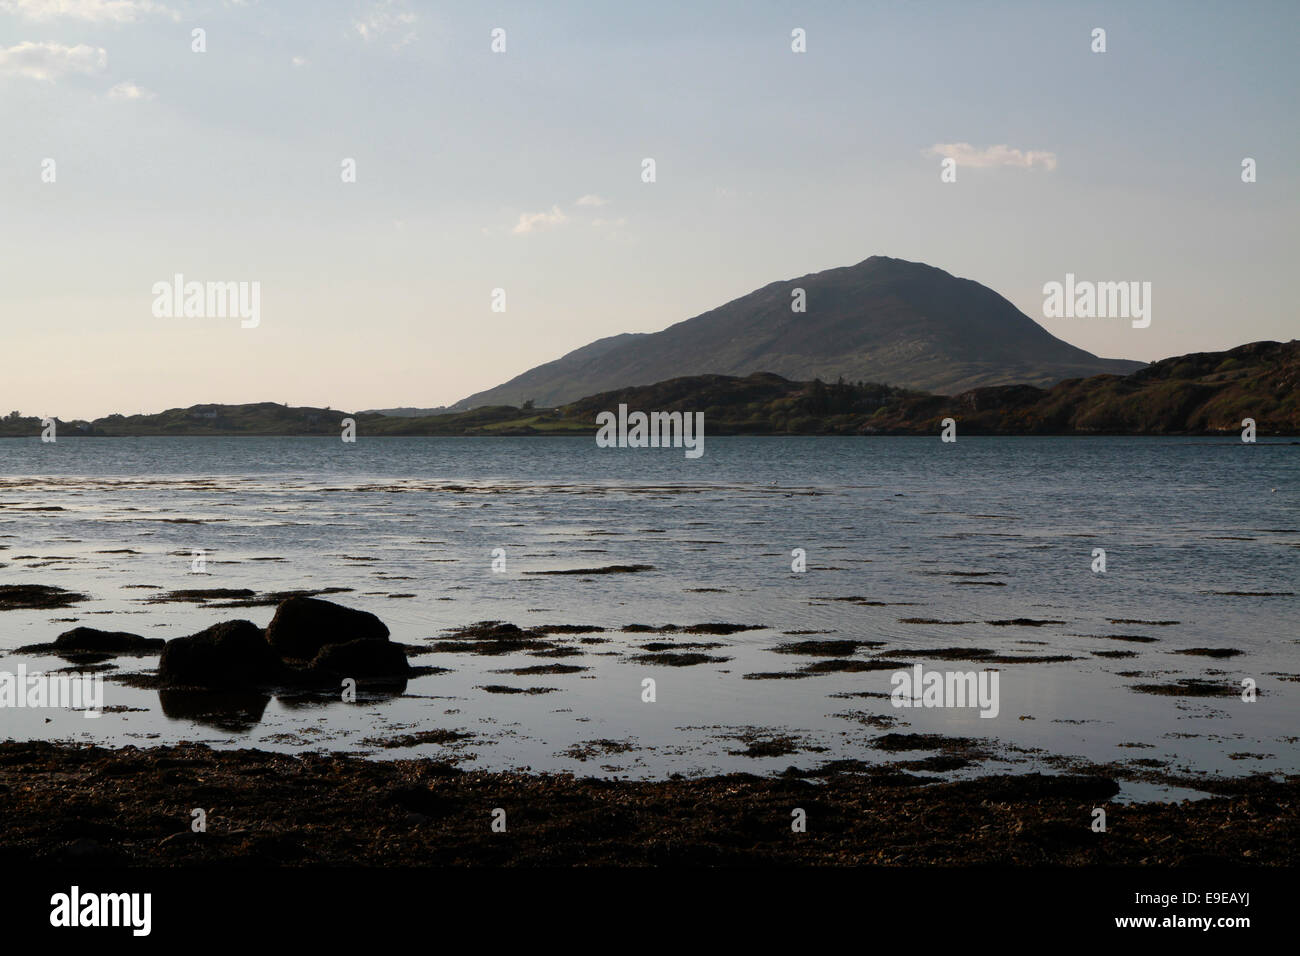 Barnaderg Bay, Ballynakill Harbour, with Tully Mountain in the background, Letterfrack, Connemara, County Galway, Ireland Stock Photo